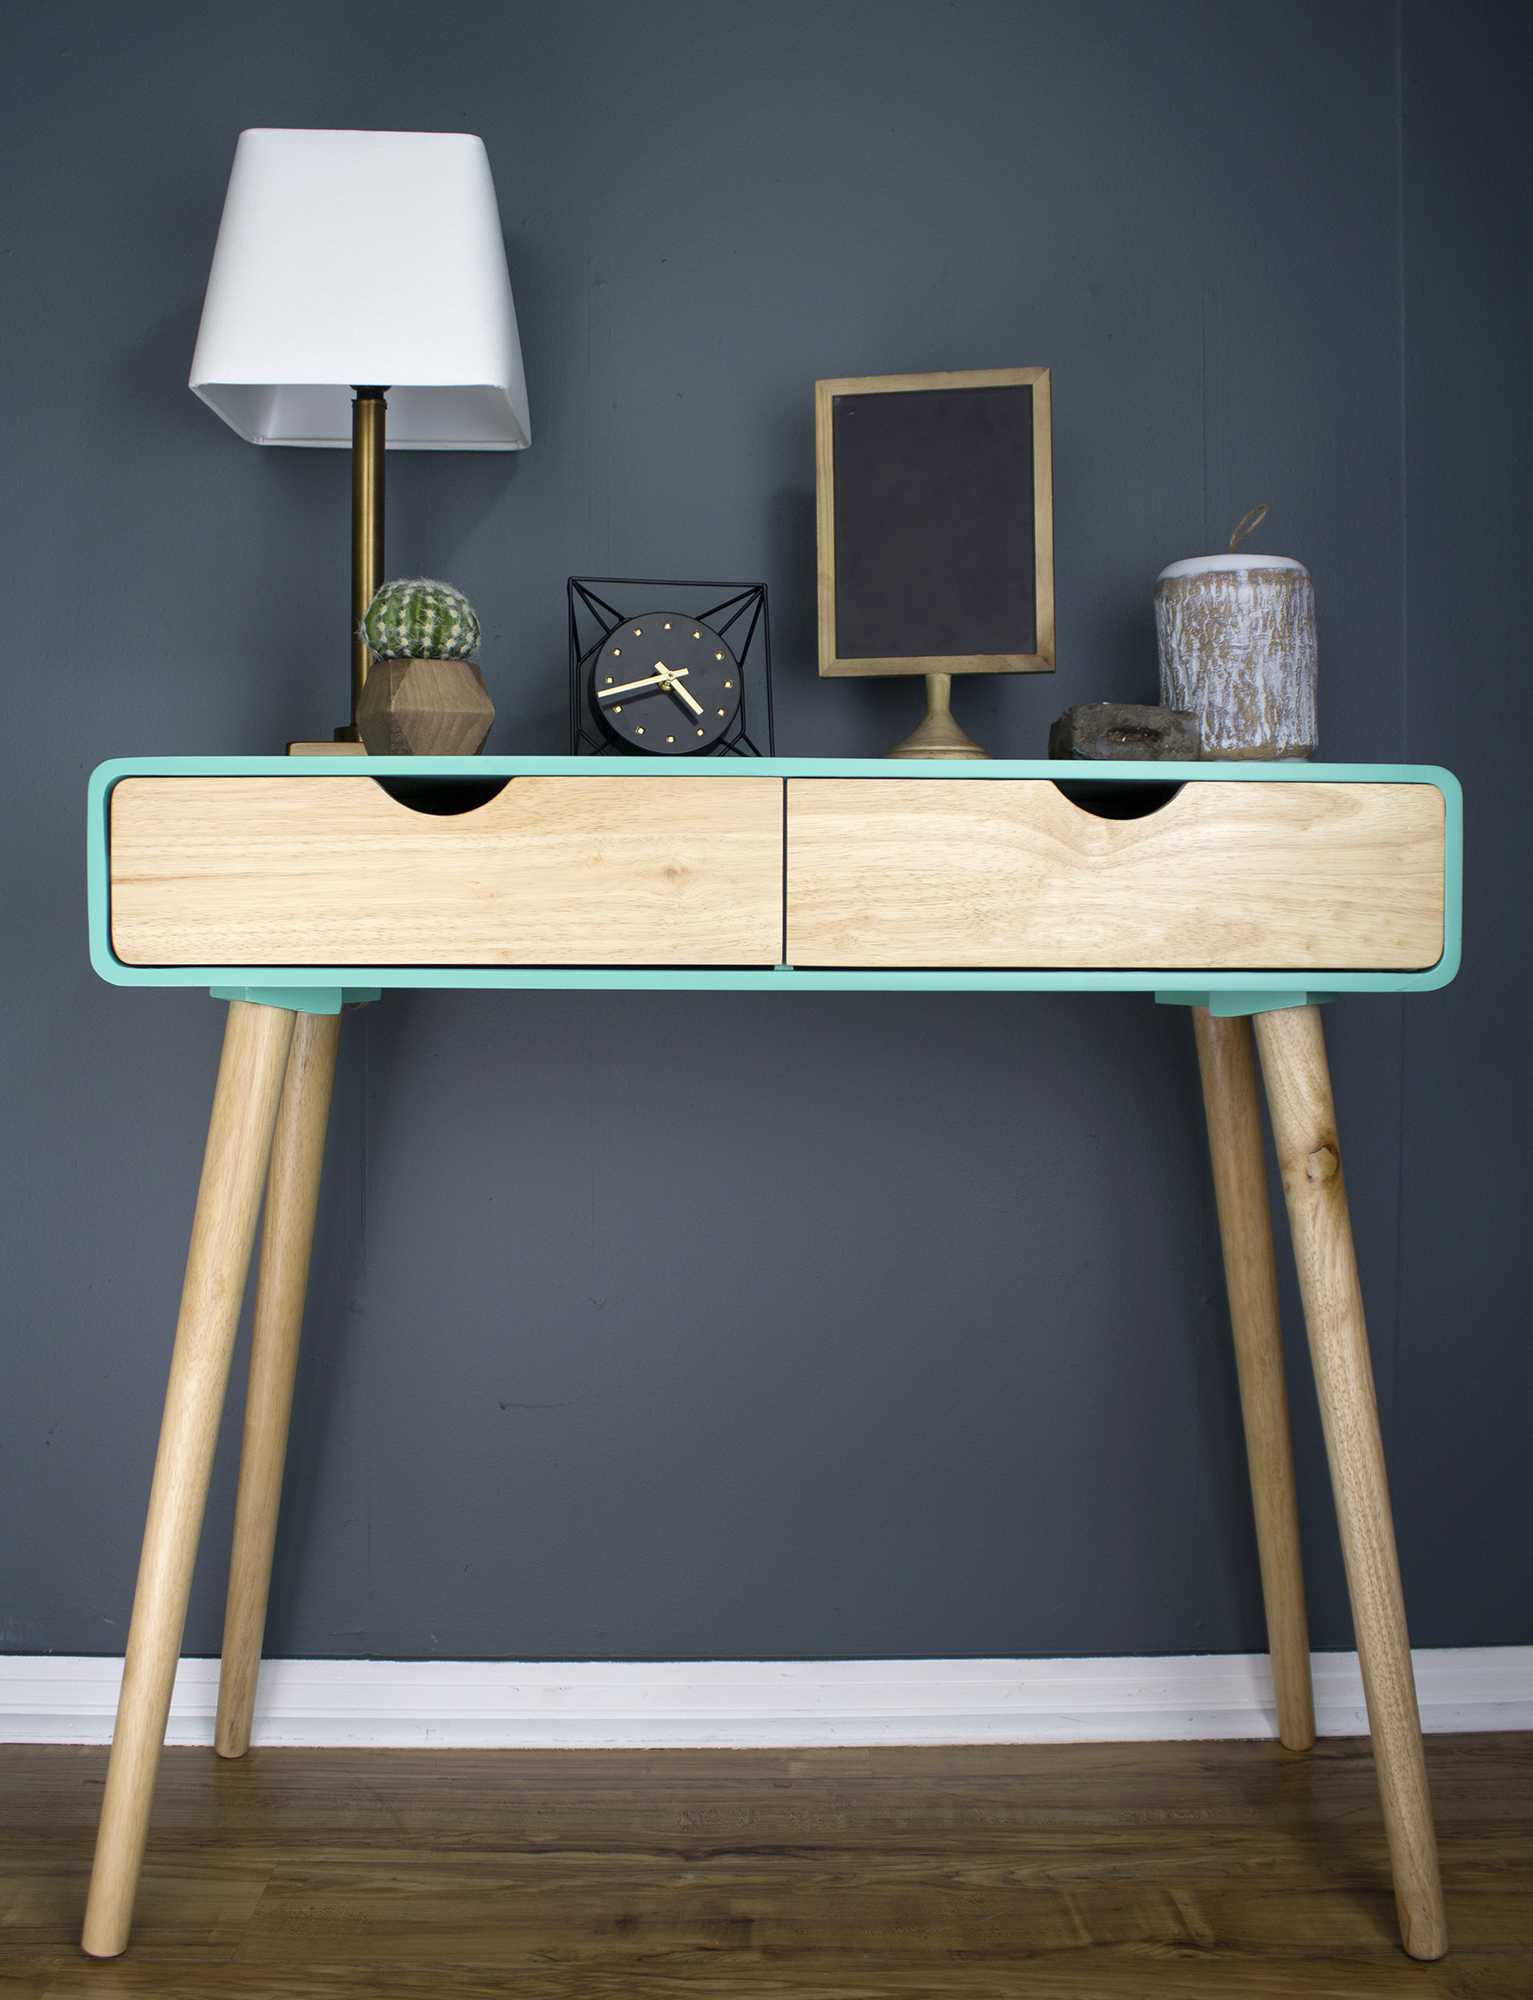 38.5" X 9" X 17" Aqua MDF Wood Console Table with Drawers